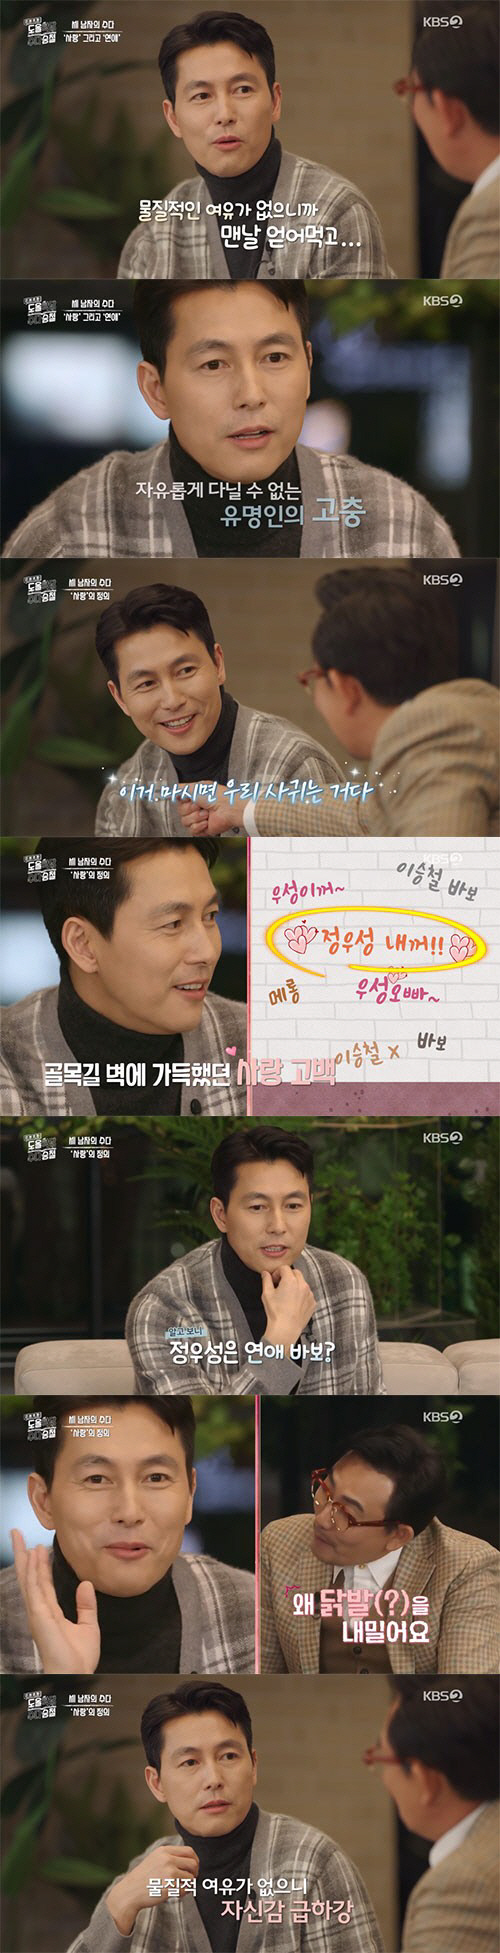 Actor Jung Woo-sung showed off his candid talk about love.On the 18th KBS 2TV Dool Hakdang Suh Seung Chul, the second time, the philosopher Dool Kim Yong-ok and singer Lee Seung-cheol, and the actor Jung Woo-sung shared their love stories.Lee Seung-cheol asked Jung Woo-sung, Are you having a love affair? Jung Woo-sung replied meaningfully, Love should always be.Lee Seung-cheol laughed when he said, There seems to be something to avoid answering.Kim Yong-ok gave a lecture on the love ae () in Confucianism, where Kim Yong-ok wrote, The child in Confucianism is acquiesced; he cares about his wife.Thats love, said Kim Yong-ok, who said, All the lyrics of Lee Seung-cheol are love.However, the love of each song is different, he said, embarrassed Lee Seung-cheol, and Lee Seung-cheol laughed, saying, I do not write all the songs. Lee Seung-cheol then asked Jung Woo-sung, Have you ever been dumped by a woman? Jung Woo-sung said, Of course it is.I did not have enough material, so I always ate it. I lived a model life, but it was not easy. Jung Woo-sung has gathered topics with his public devotion to actor Ijia in the past. Lee Seung-cheol told Jung Woo-sung, Did not you have a public love?Wasnt it romantic for a woman friend?, Jung Woo-sung said, Its the job of Friend, the most uncomfortable man in the world. I could not have a routine date.The whole nation knew. I couldnt go around freely. It was a useless, uninteresting man, Friend.Jung Woo-sung also recalled a popular past.When I was part-time at a hamburger shop, there were many graffiti on the alley to the bathroom, Jung Woo-sungs mine. He said, I did not have much love.I also did not have enough time to afford it, so I could not say, Lets go to eat this. Jung Woo-sung also had an idea of marriage; he hoped that there are professional dreams as a member of society, but it is a dream to be a good father.Finally, Jung Woo-sung said, If you define love as a human being, love is to acknowledge your opponent.I say that it gives me a sense of distance as much as I love, but I do not know. Jung Woo-sung commented on Kim Yong-oks lecture, I think I was proud to know love well by frequently using the word love.After listening to the lecture, I learned the deep meaning of love again. Meanwhile, Jung Woo-sung also revealed the occasion of becoming a goodwill ambassador for the Refugee Organization, saying: The agency first contacted me; there was no reason to refuse.After leaving the mission for the first time, I became responsible. I was looking for the victims of the war to be ordinary citizens. Especially about the recent situation of receiving Flaming in relation to Refugee, It was not affected by Flaming.Its only comments that are used from one side, he said. I just think its different from me.